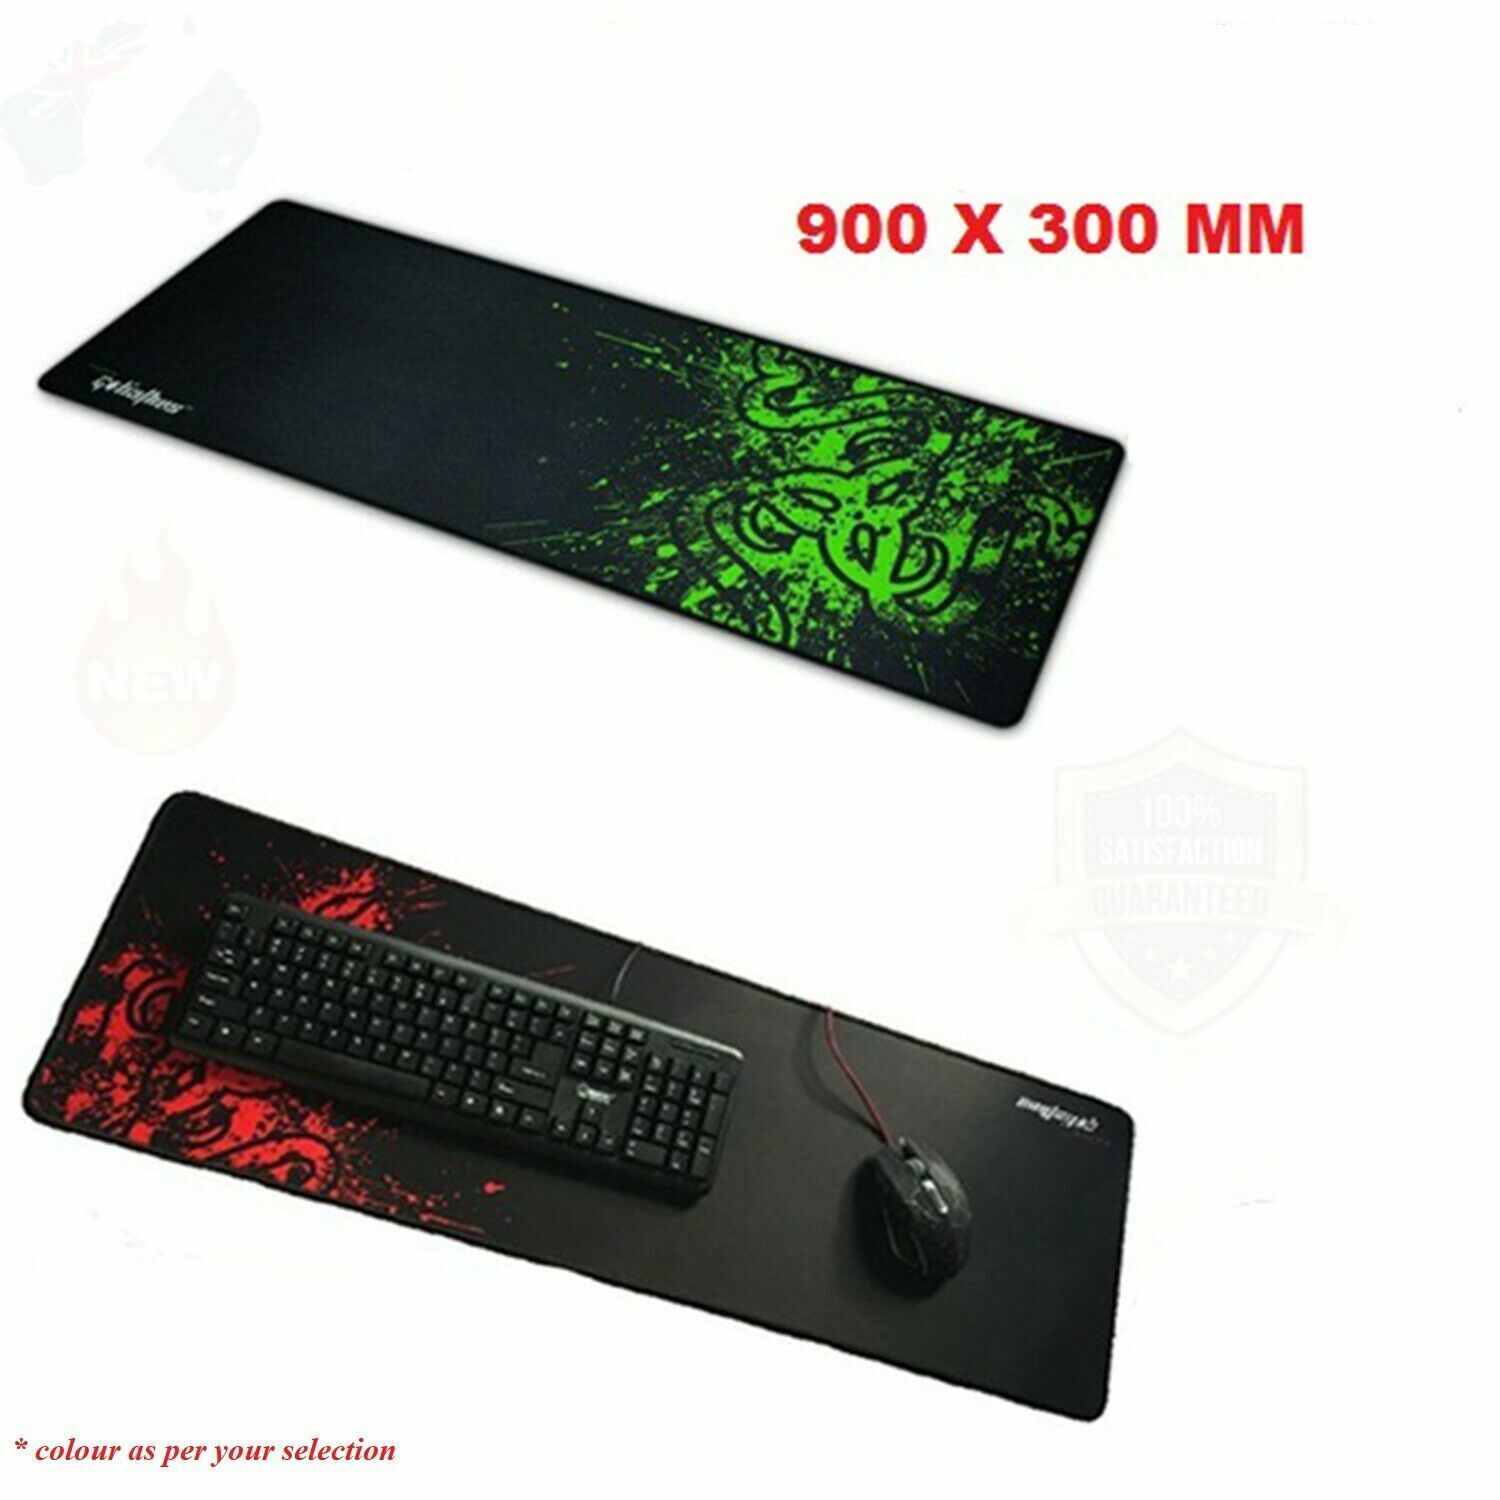 GAMING MOUSE PAD LARGE SMALL DESK KEYBOARD MAT FOR COMPUTER LAPTOP PC MACBOOK US